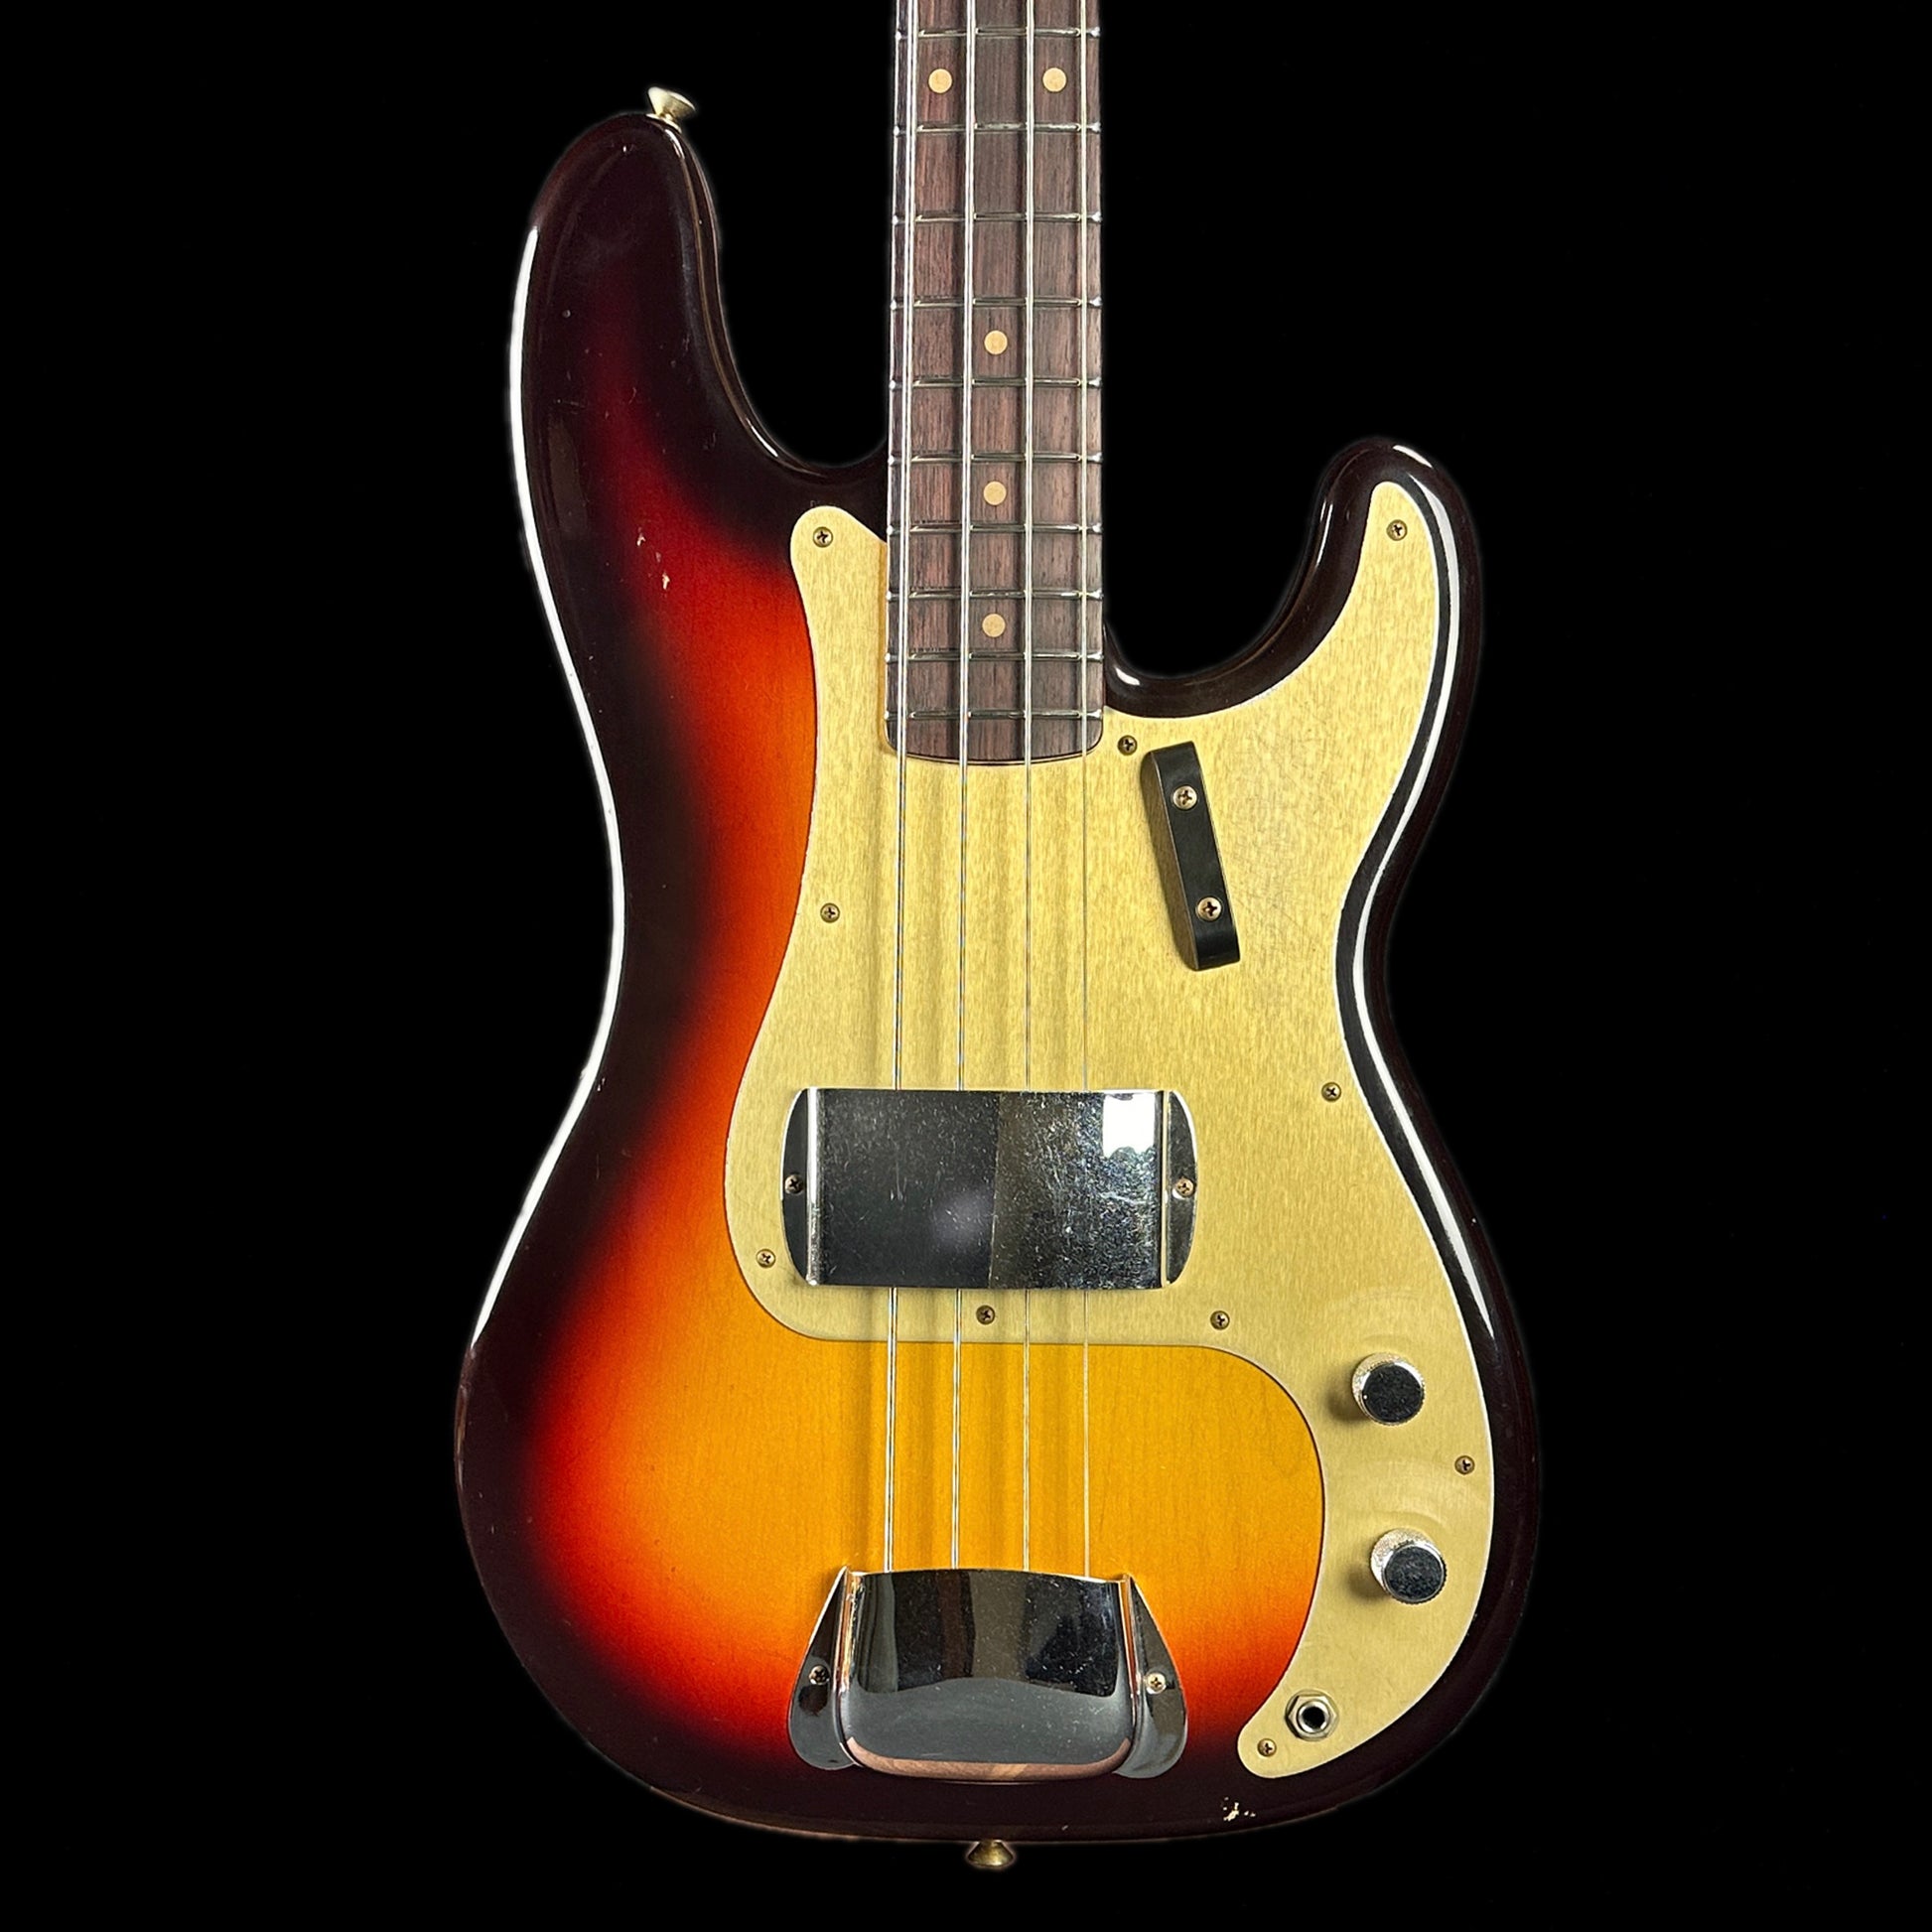 Front of body of Fender Custom Shop Limited Edition '59 Precision Bass Journeyman Relic Chocolate 3 Color Sunburst.